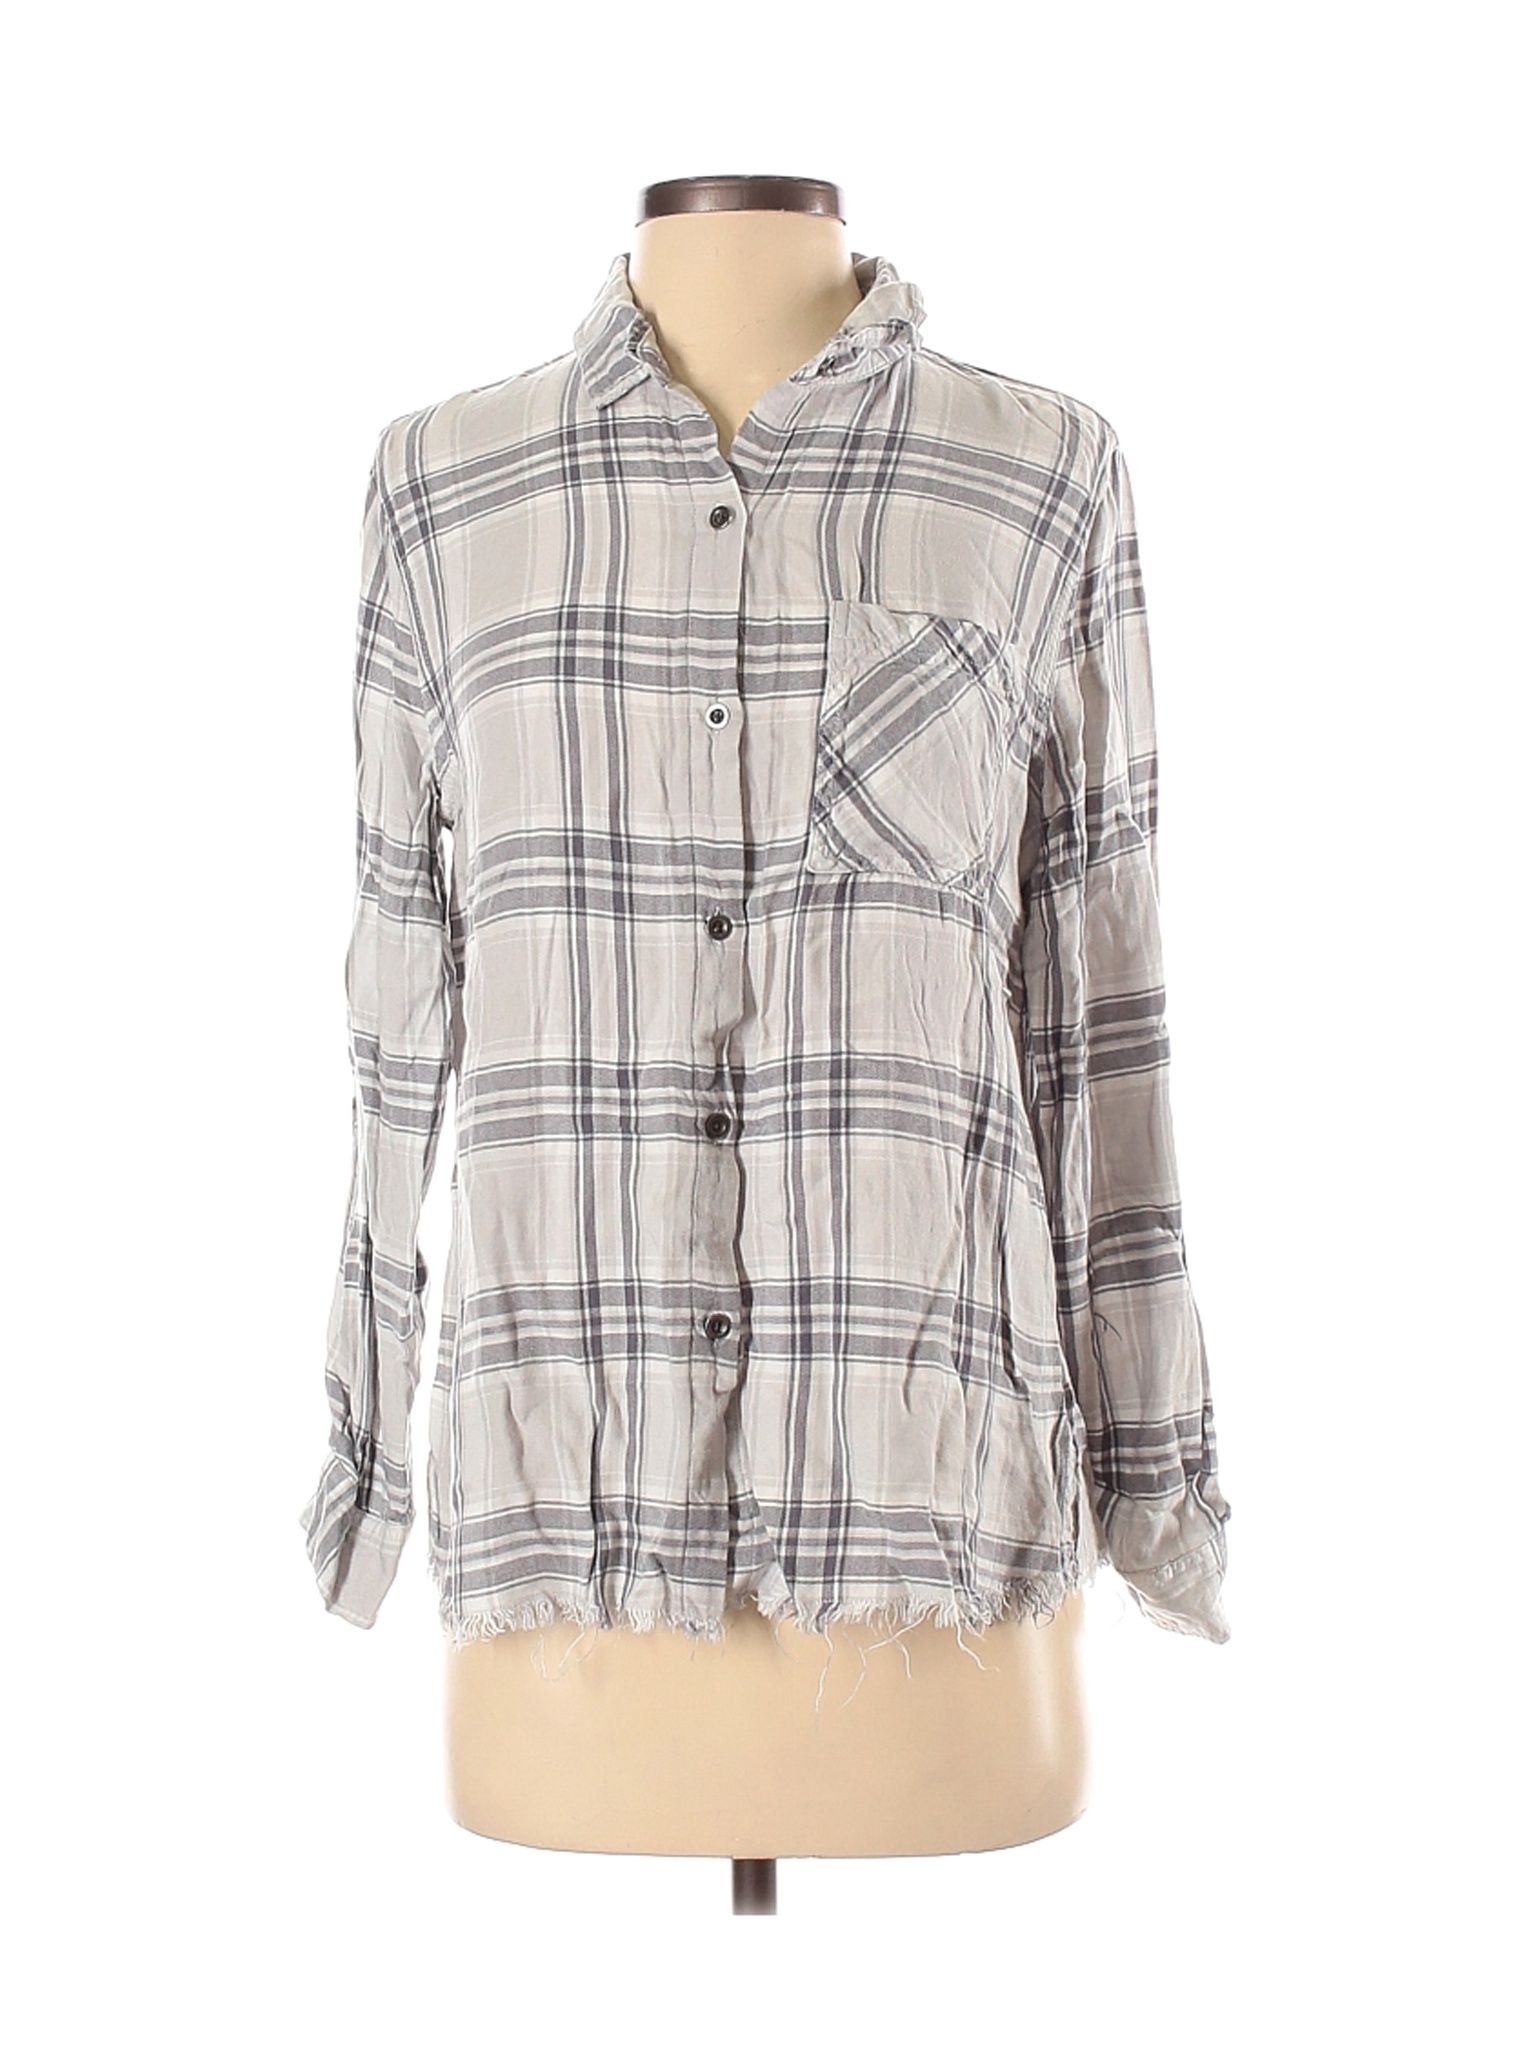 Marc by Andrew Marc Women Gray Long Sleeve Button-Down Shirt S | eBay